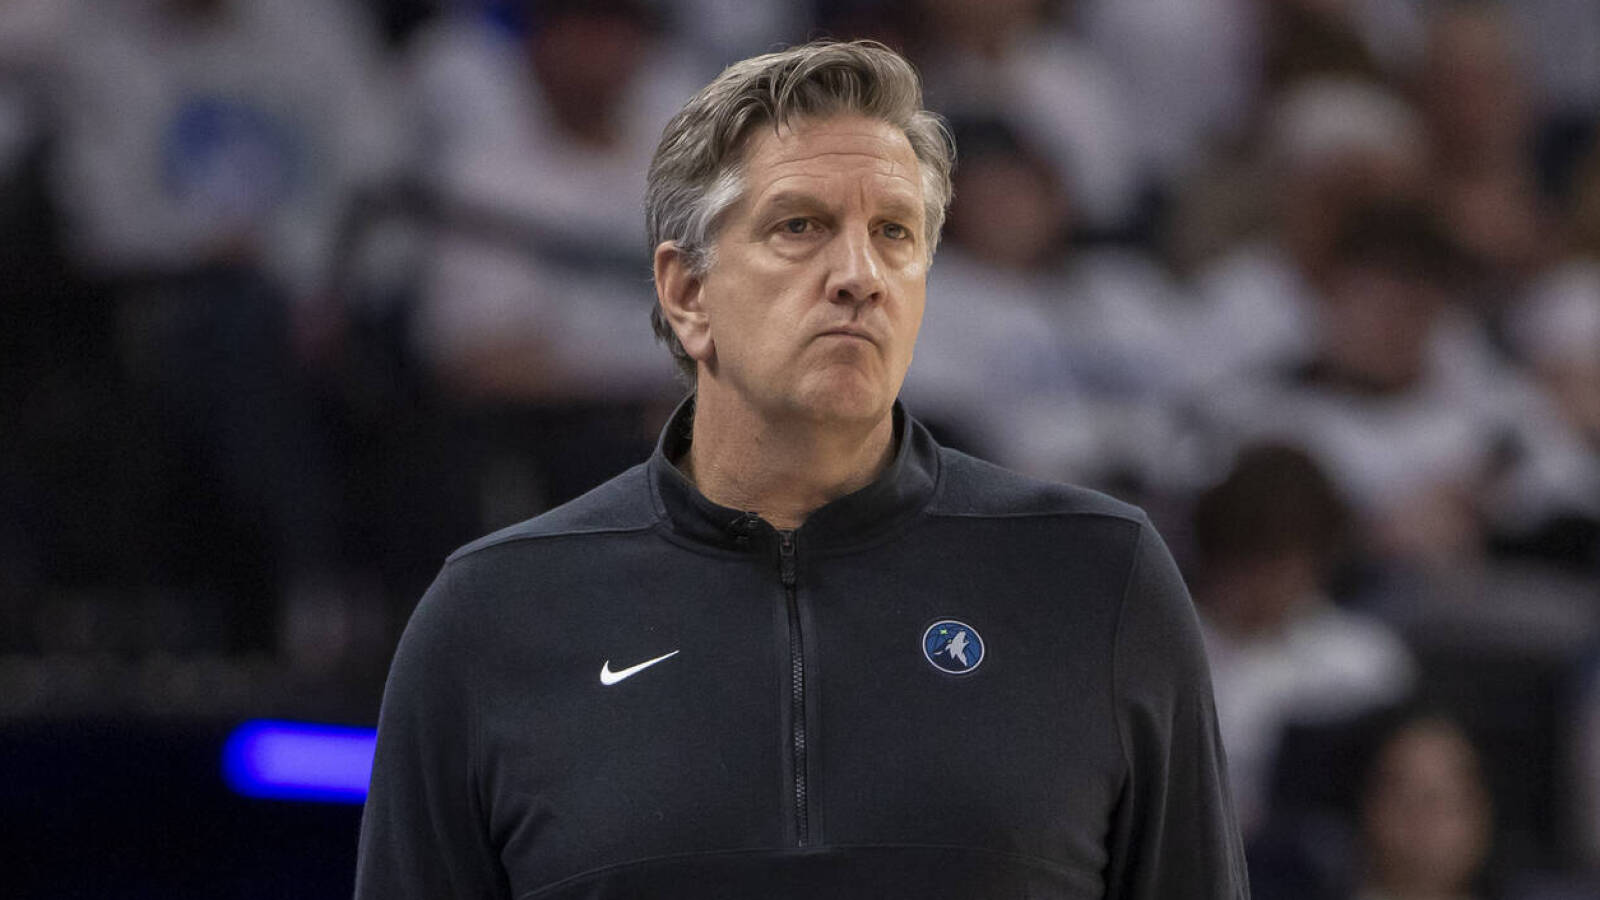 Timberwolves HC to undergo knee surgery, Game 1 availability TBD